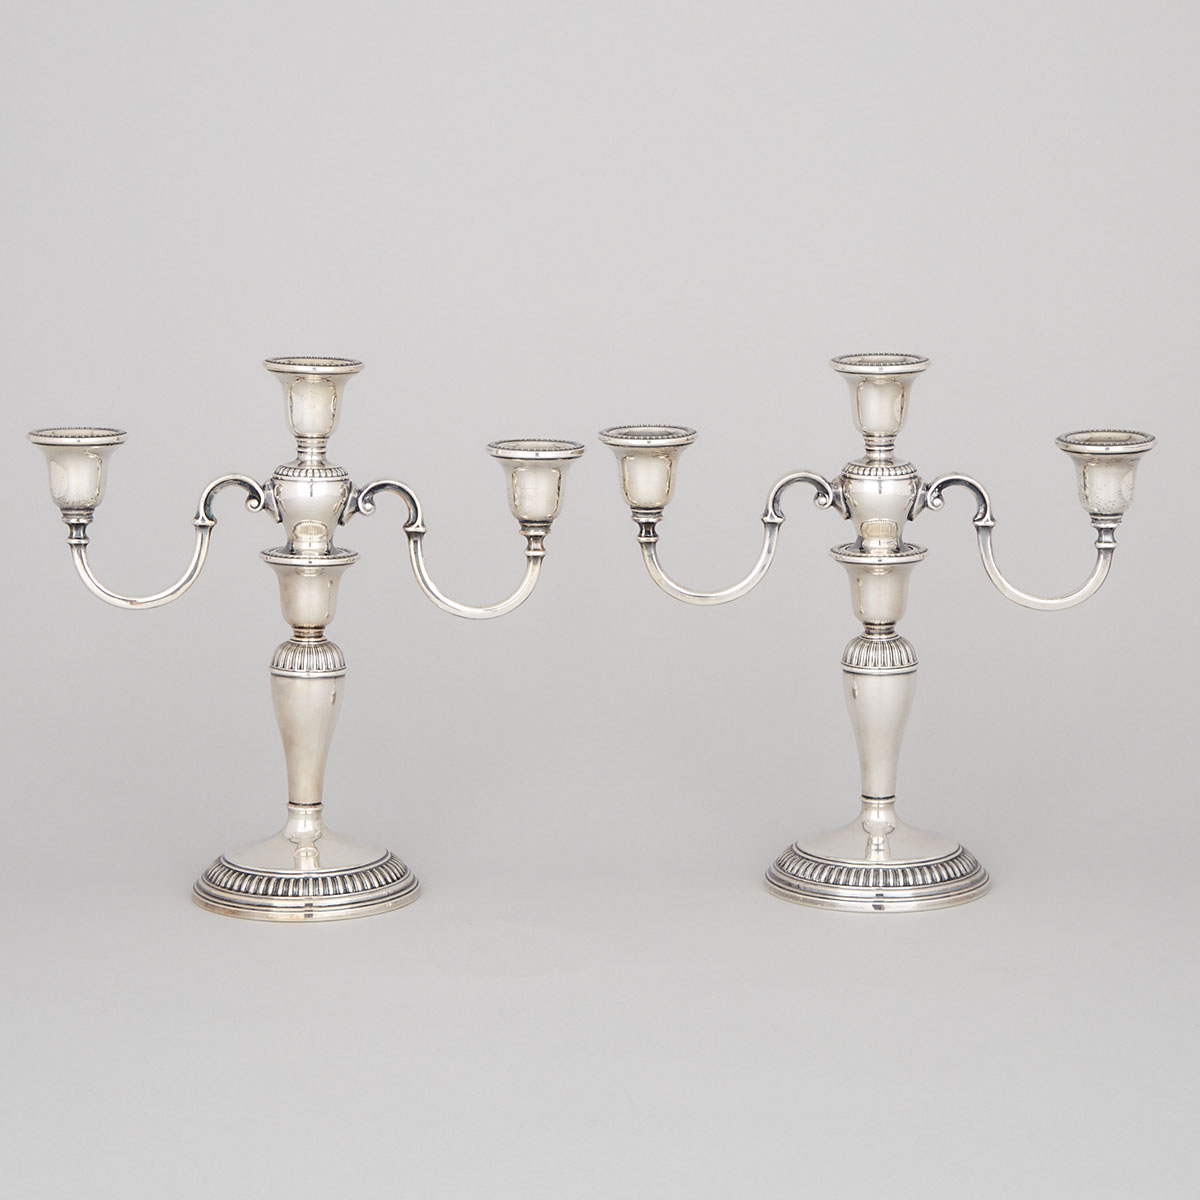 Pair of Canadian Silver Three-Light Candelabra, Henry Birks & Sons, Montreal, Que., 1964